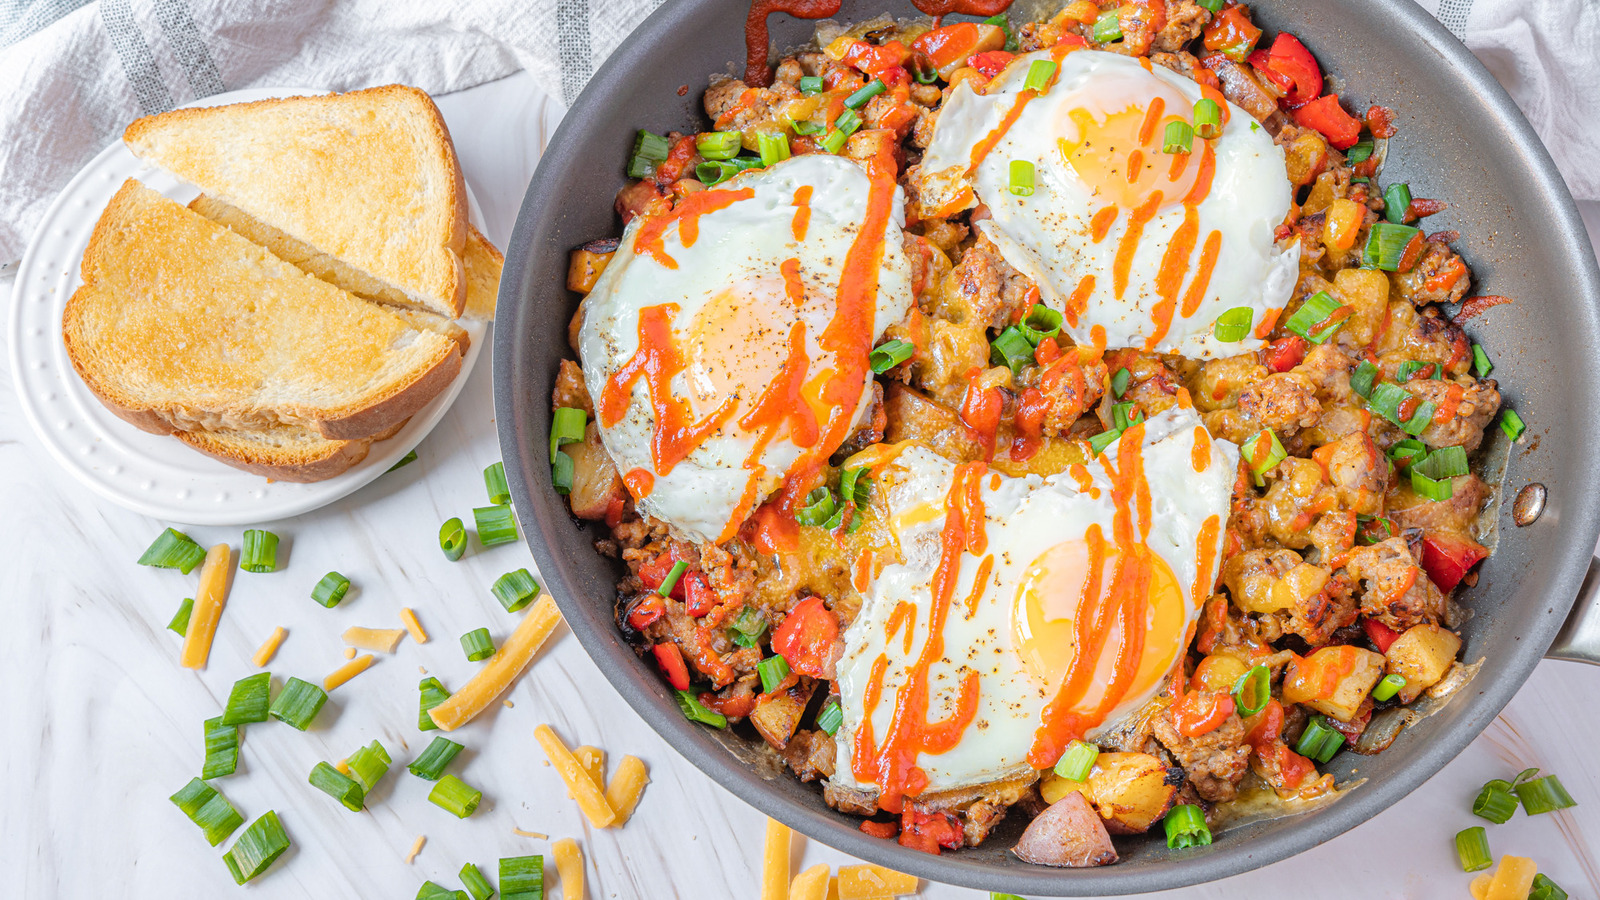 Country Breakfast Skillet - Recipe from Price Chopper